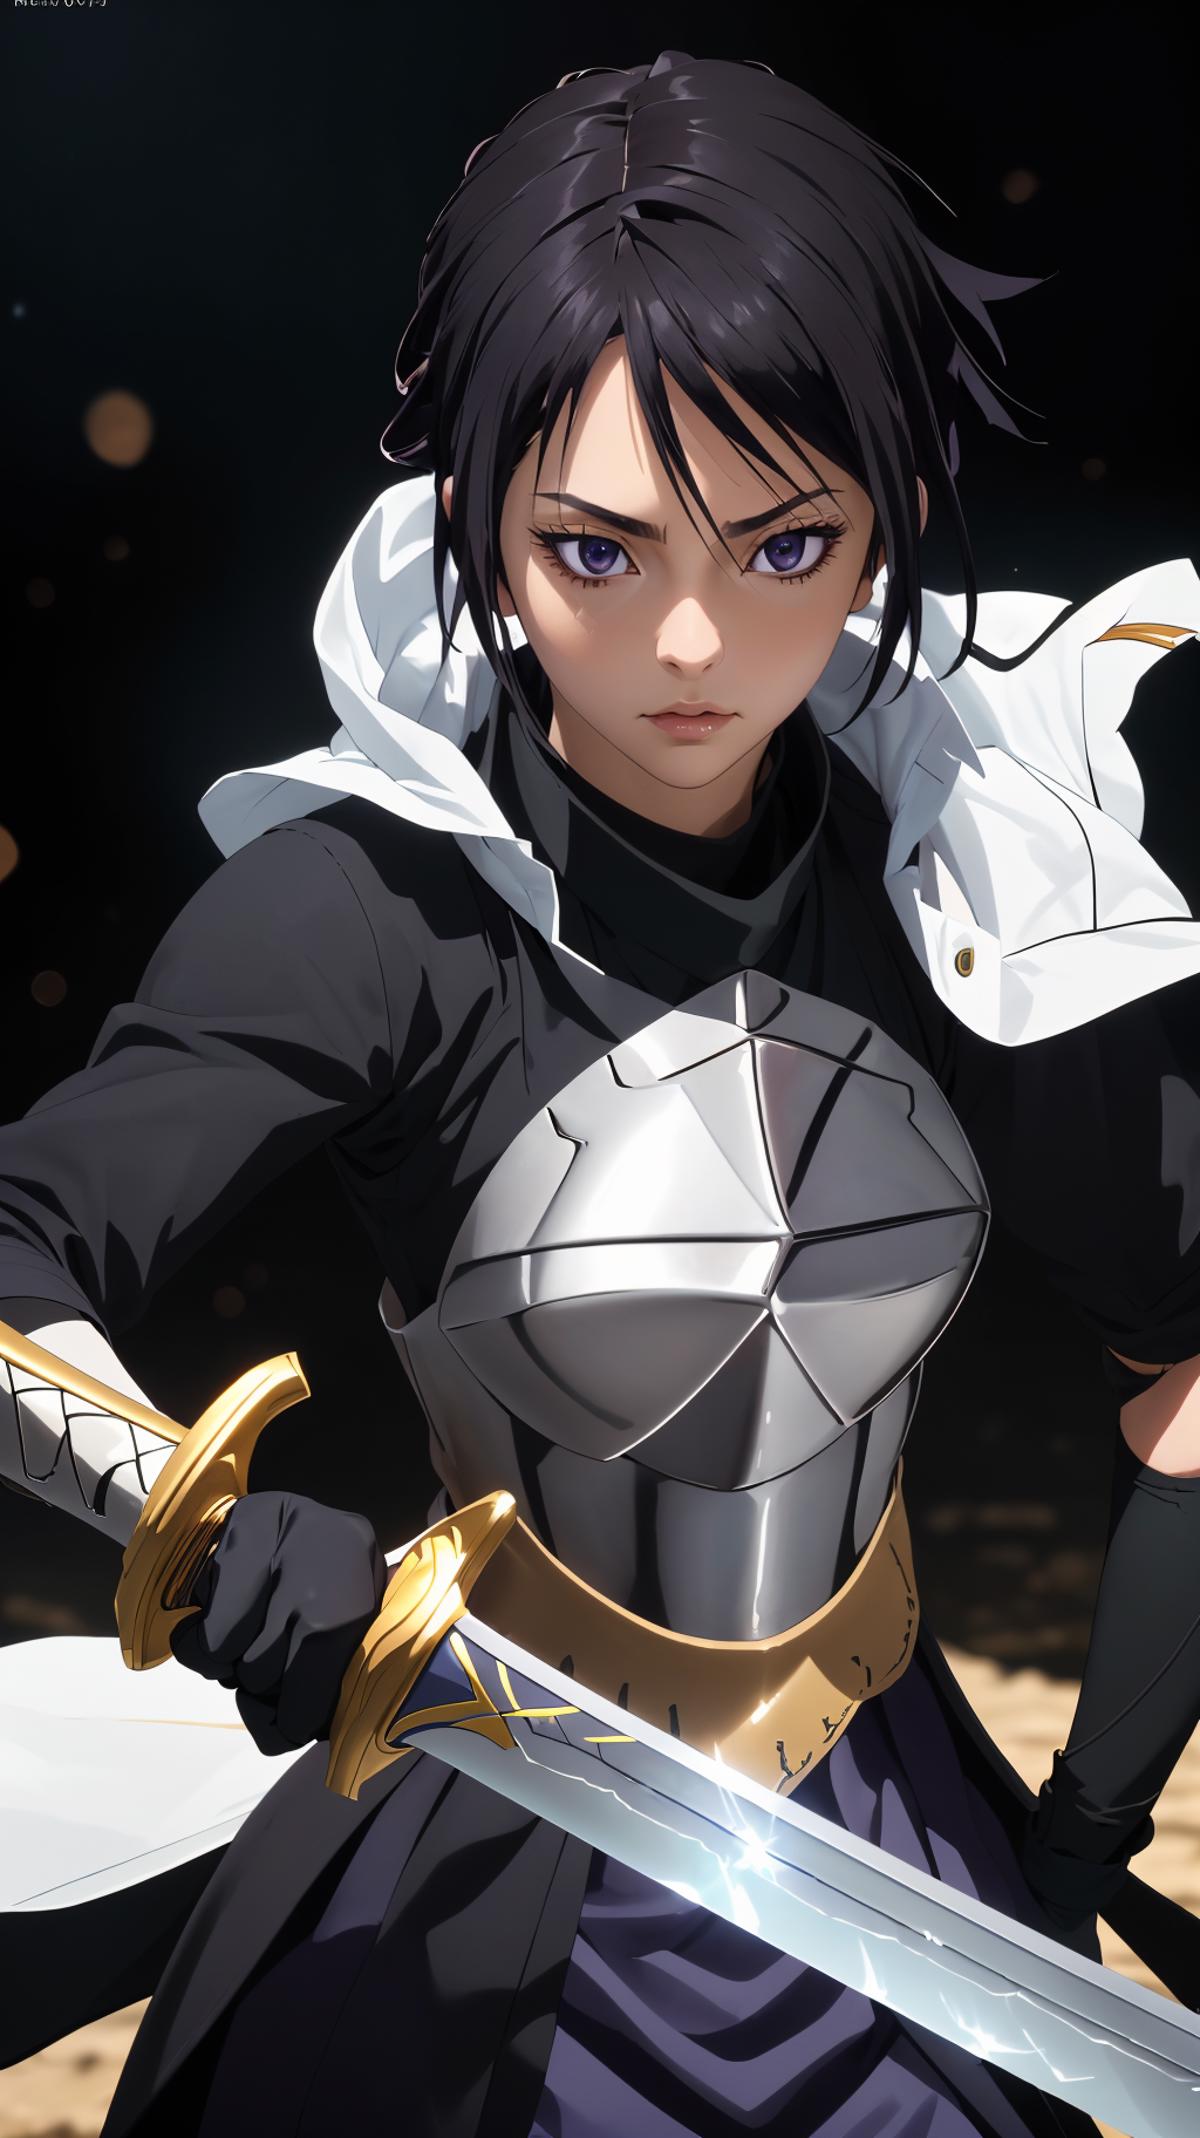 Anime character wearing a metal armor and holding a sword.